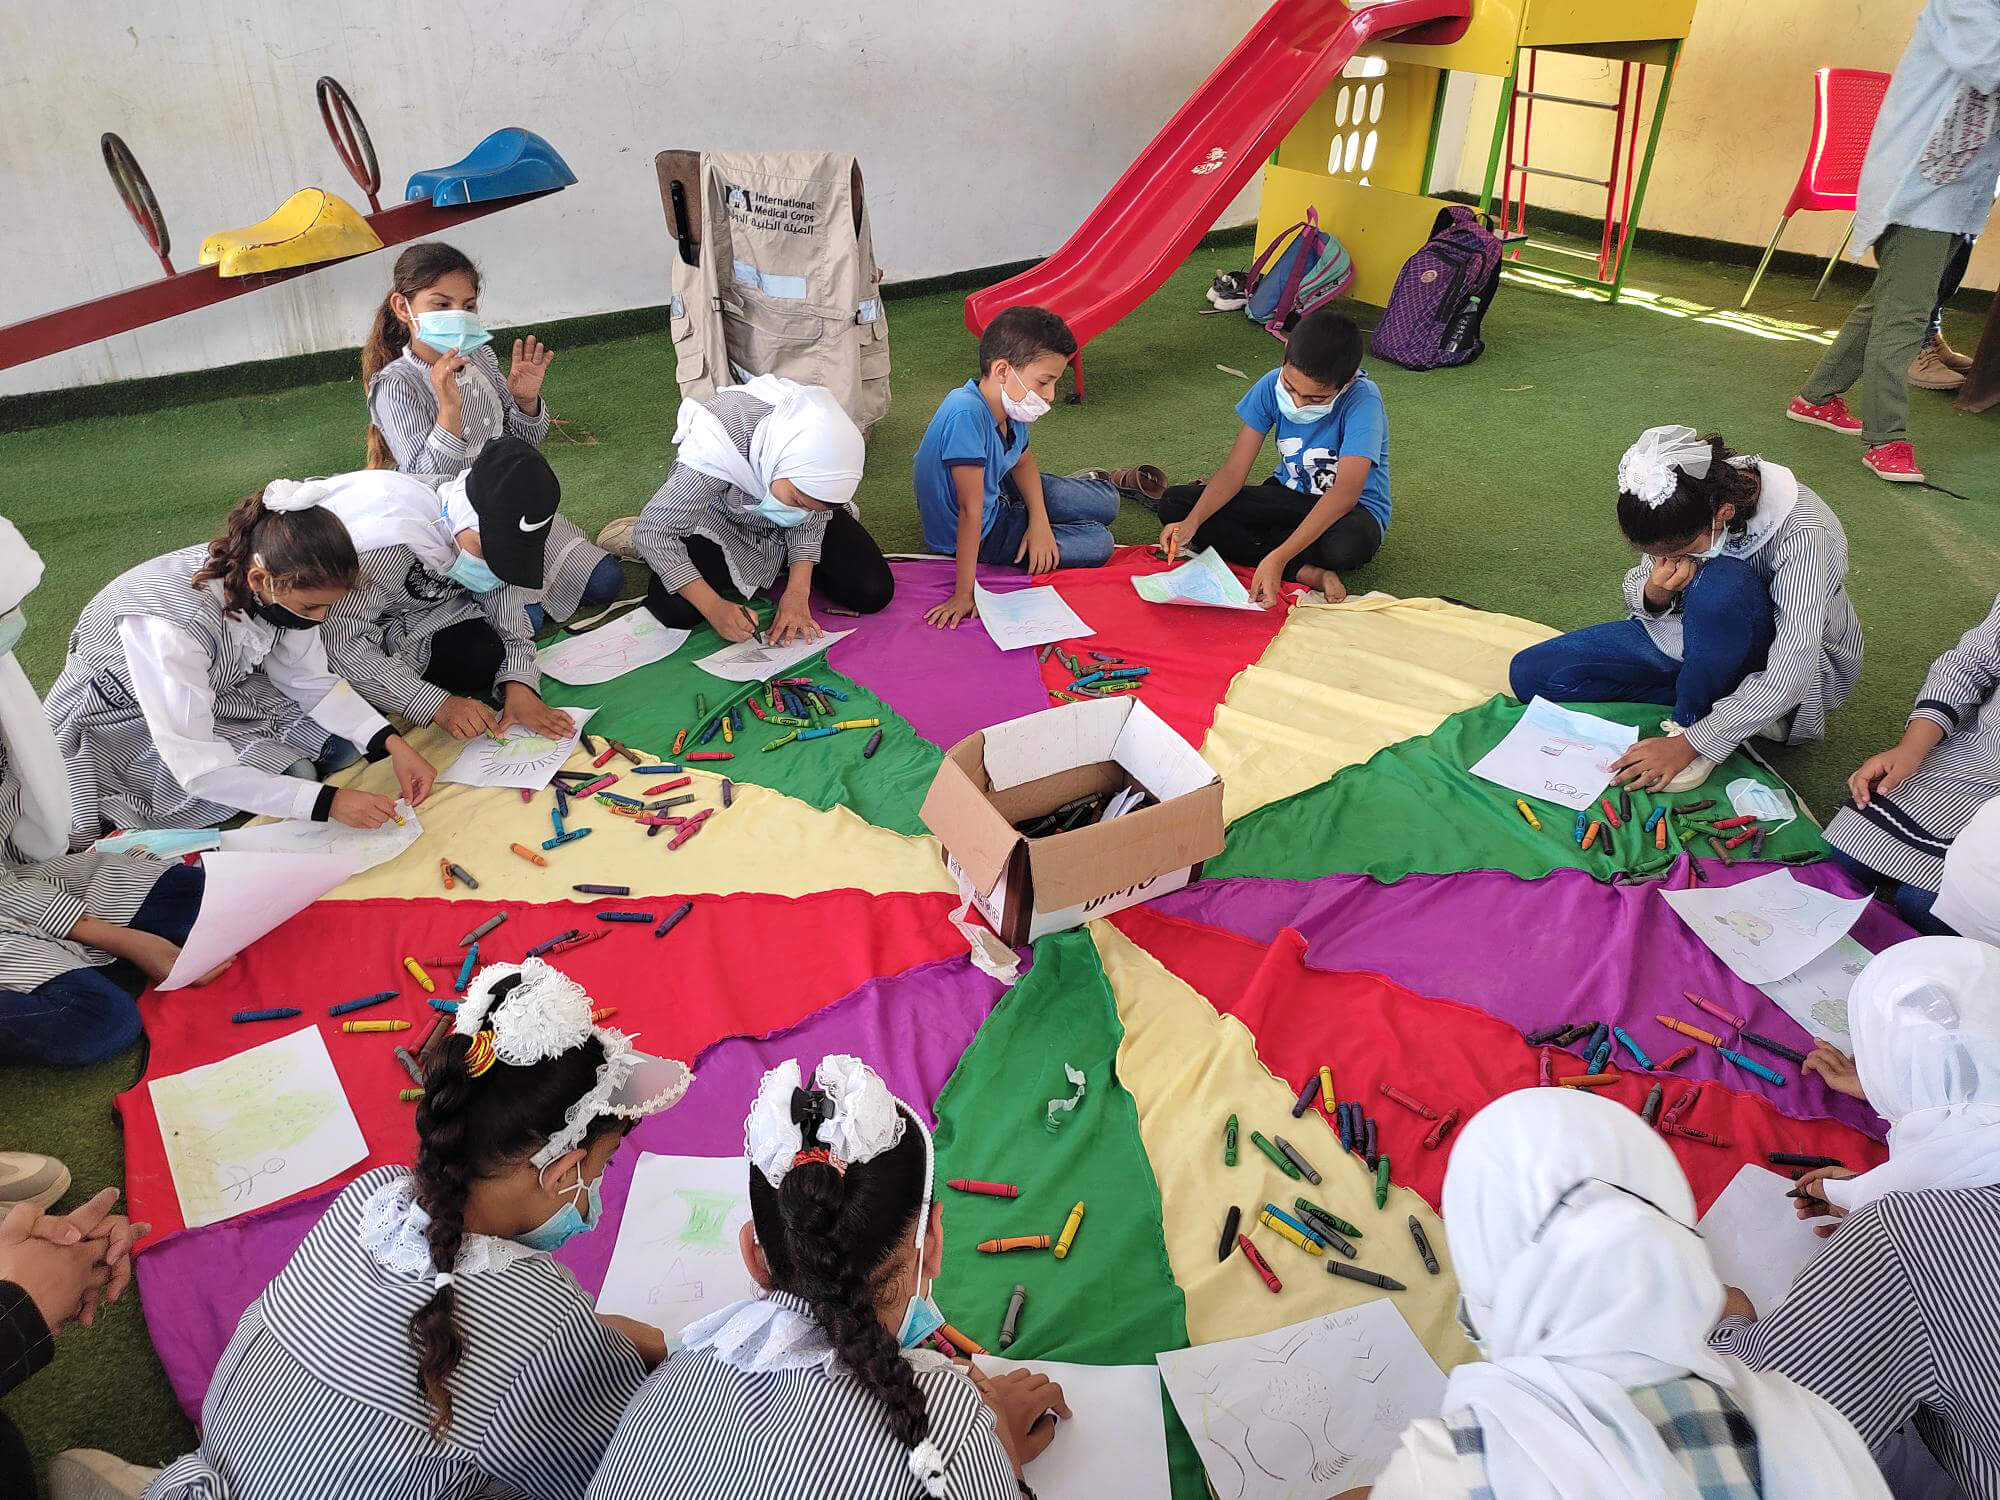 GAZA_Children-are-participating-in-PSS-session-supporting-them-to-express-their-feeling-through-drawing-activity.